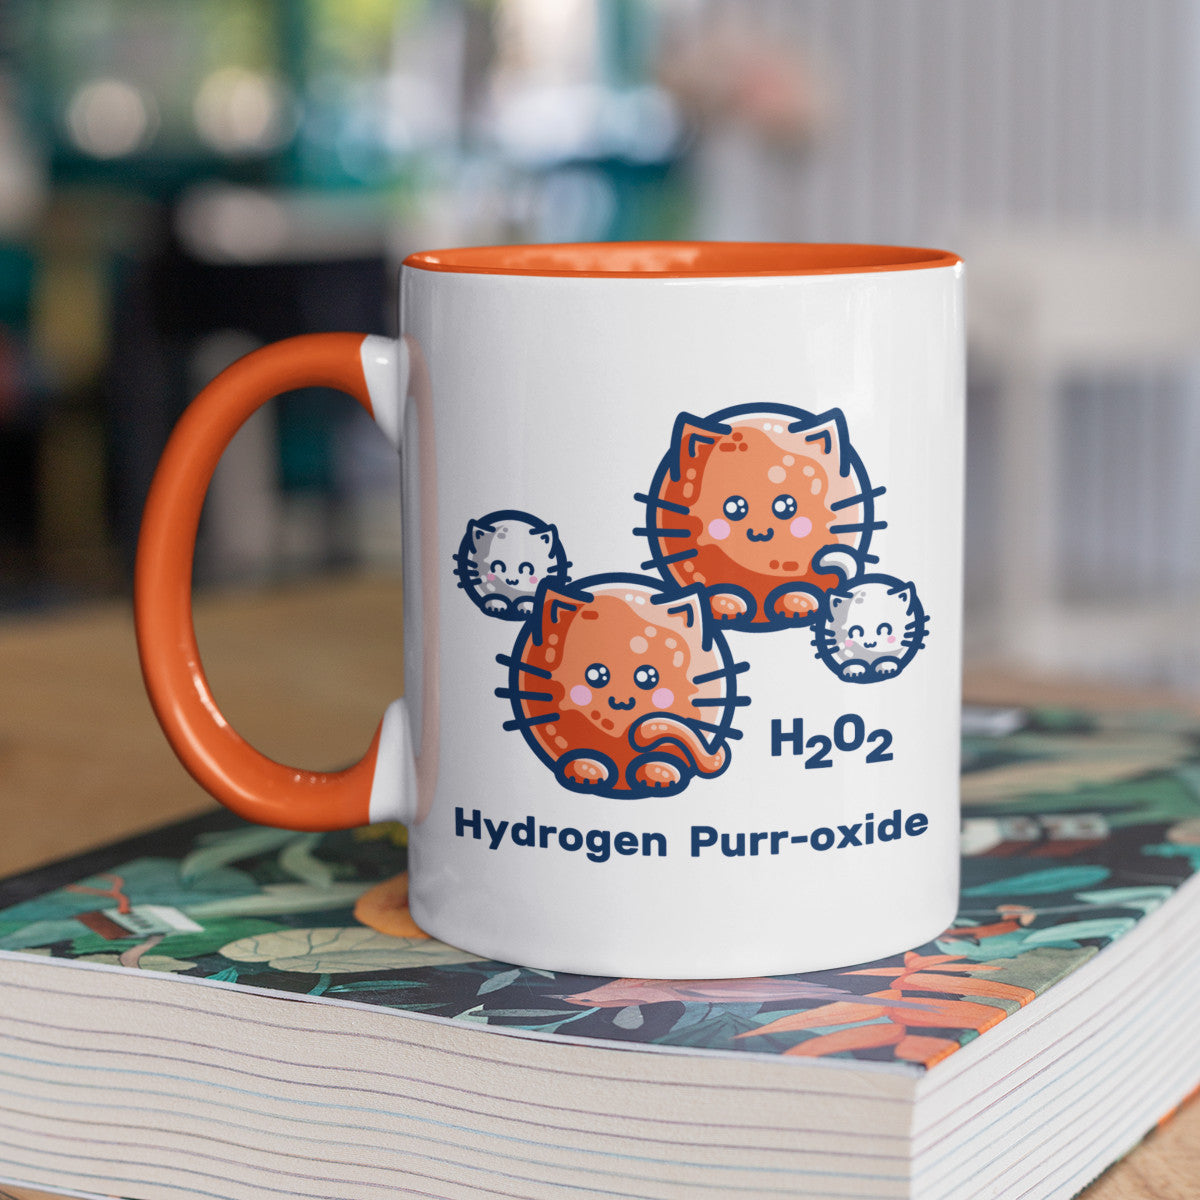 A two toned white and orange ceramic mug standing on a book and with the handle to the right, showing a design of a hydrogen molecule with the hydrogen atoms replaced by round white kittens and the oxygen atoms replaced by larger round ginger cats and the words H202 hydrogen purr-oxide.